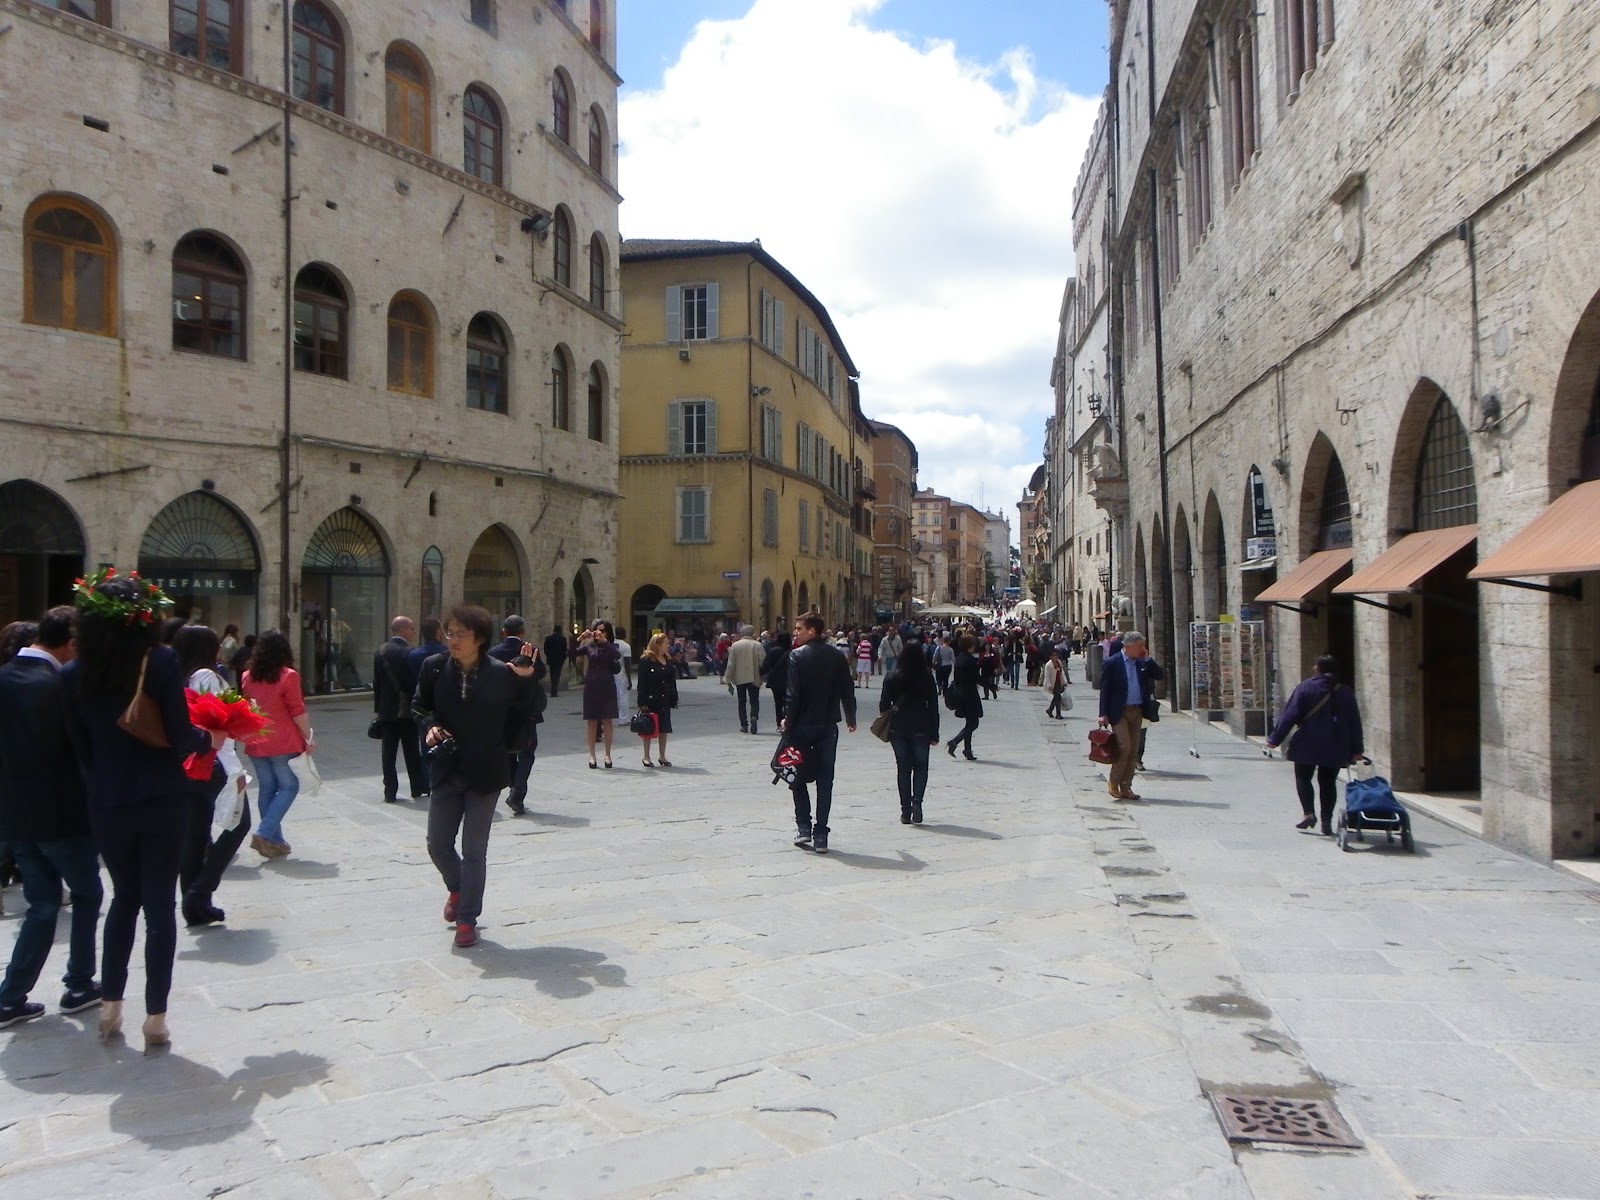 Travels with Gail and Rob: More Perugia photos